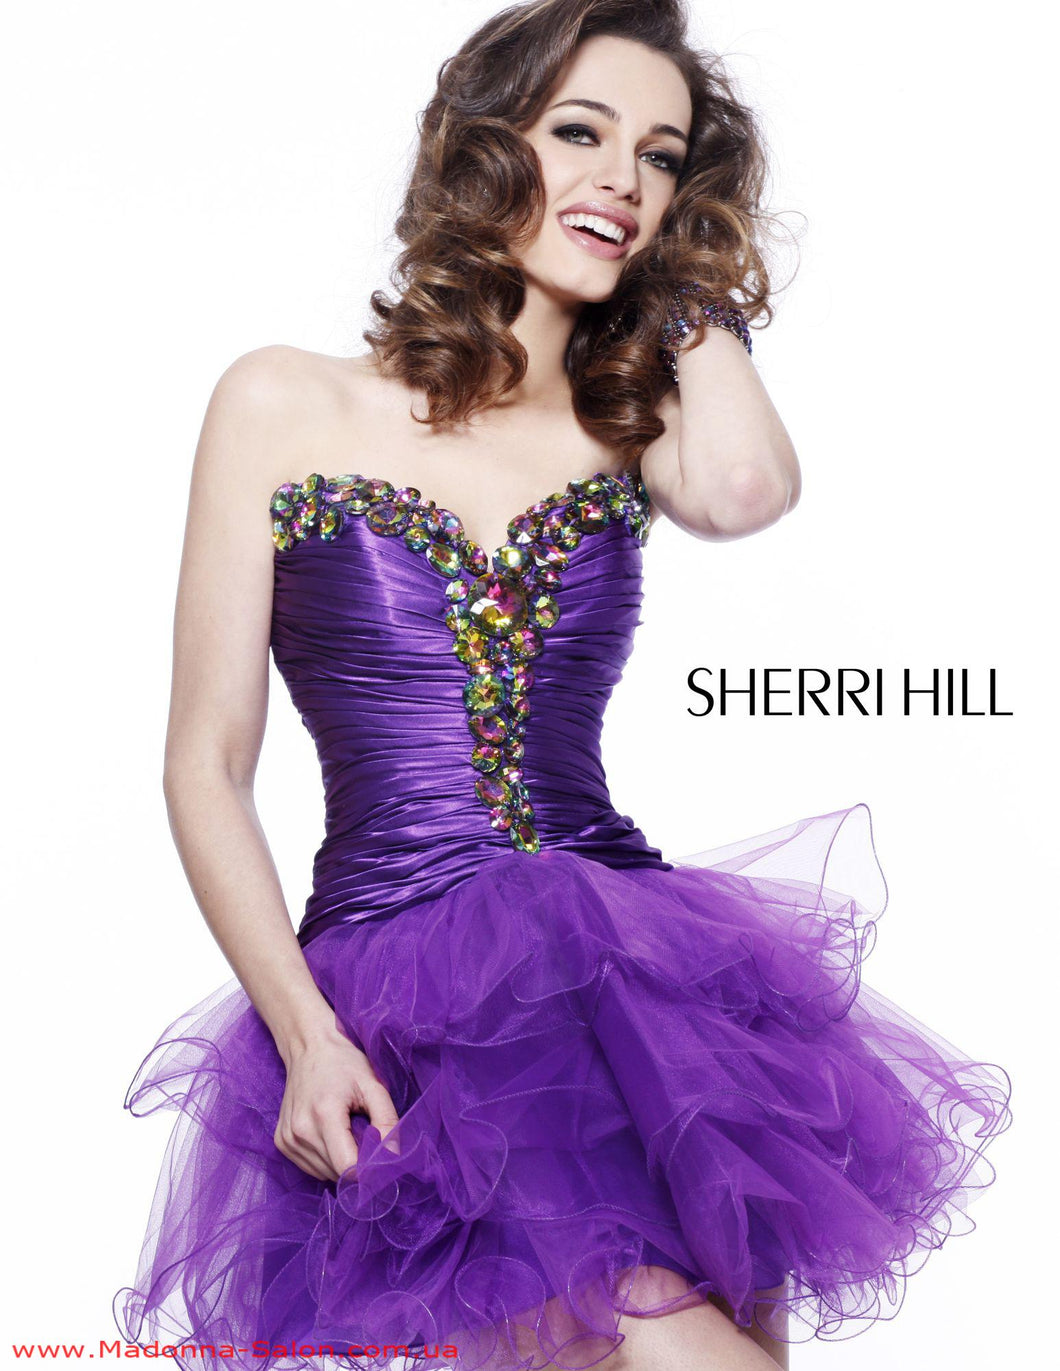 Sherri Hill Strapless Cocktail Prom Dress with a Ruched skirt 2912, Purple, size 6